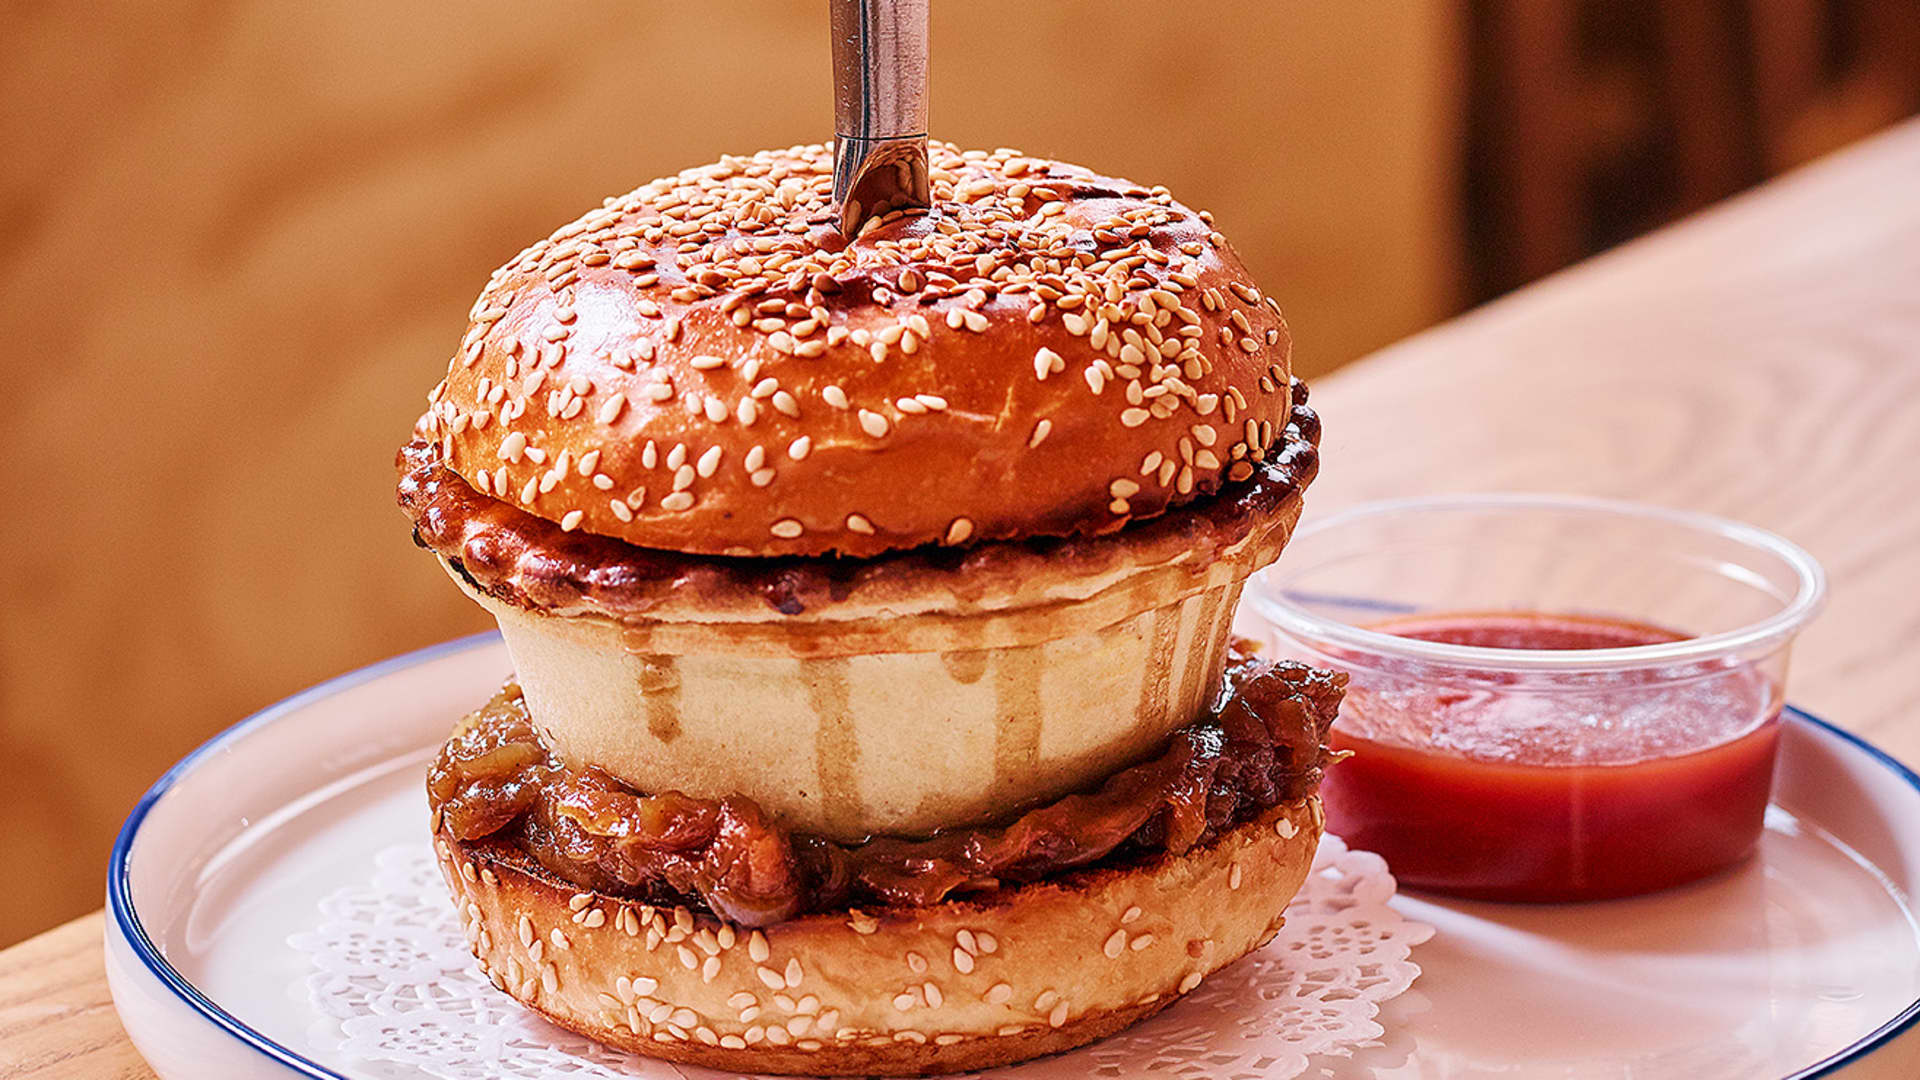 Not to be confused with a hamburger, Wonder Pies' Tradie Slammer is a beef pie served between two brioche buns, served with house-made chutney.